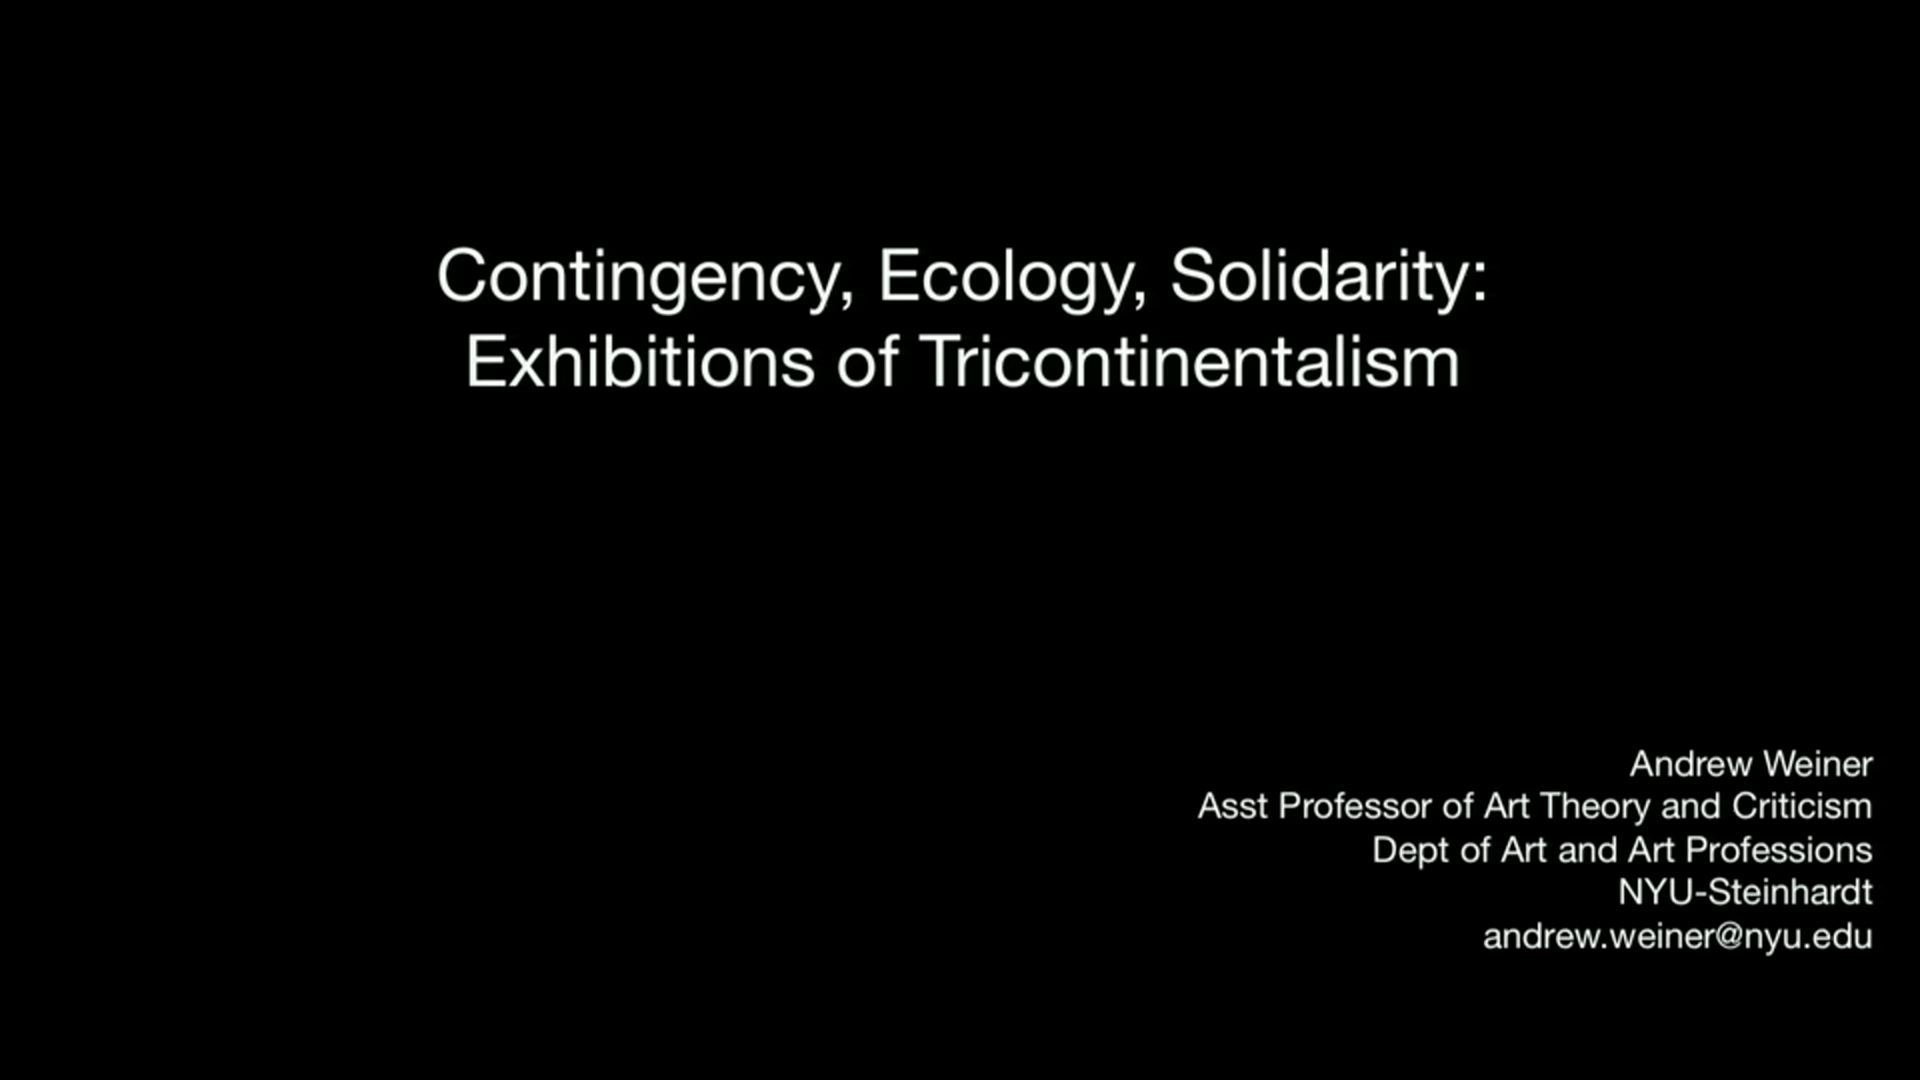 Contingency, ecology and solidarity: Exhibitions of Tricontinentalism